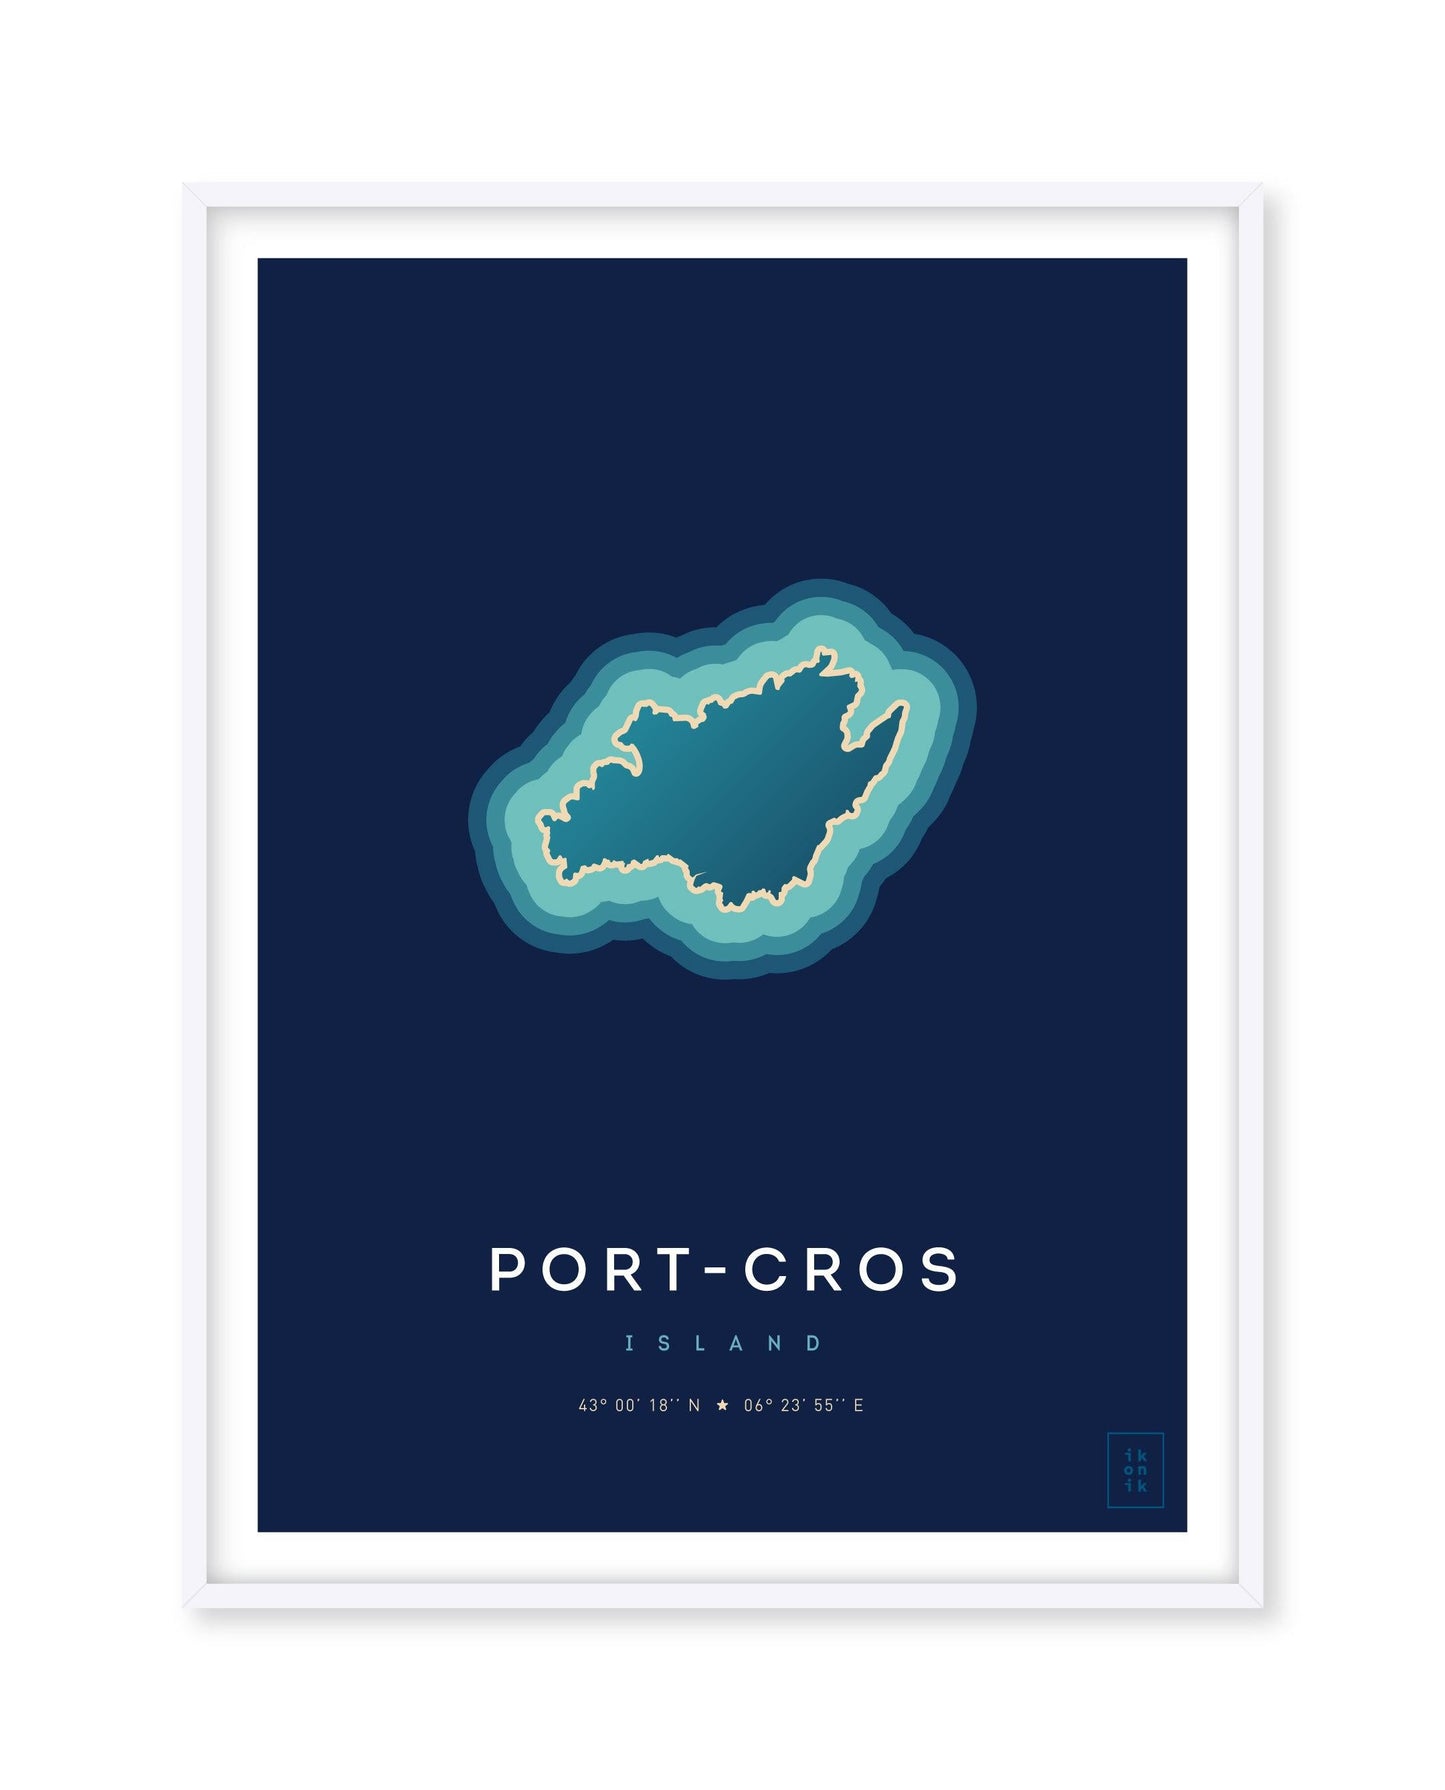 Poster of the island of Port-Cros